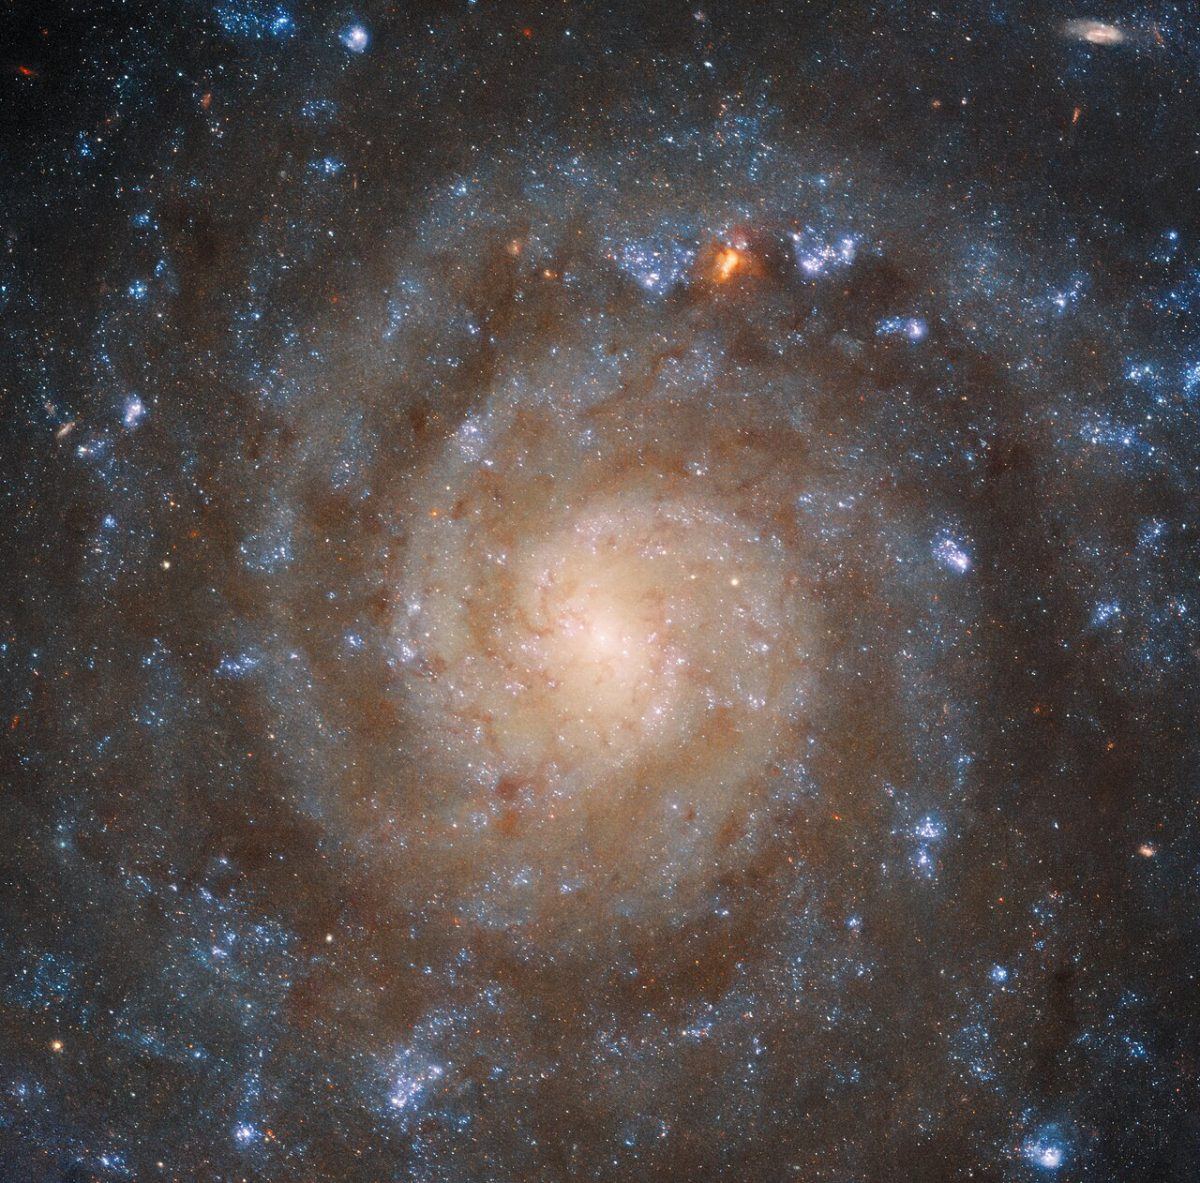 An image of a spiral galaxy, with a bright center and dusty spiral arms visible in the photo. Taken by the Hubble Space Telescope.